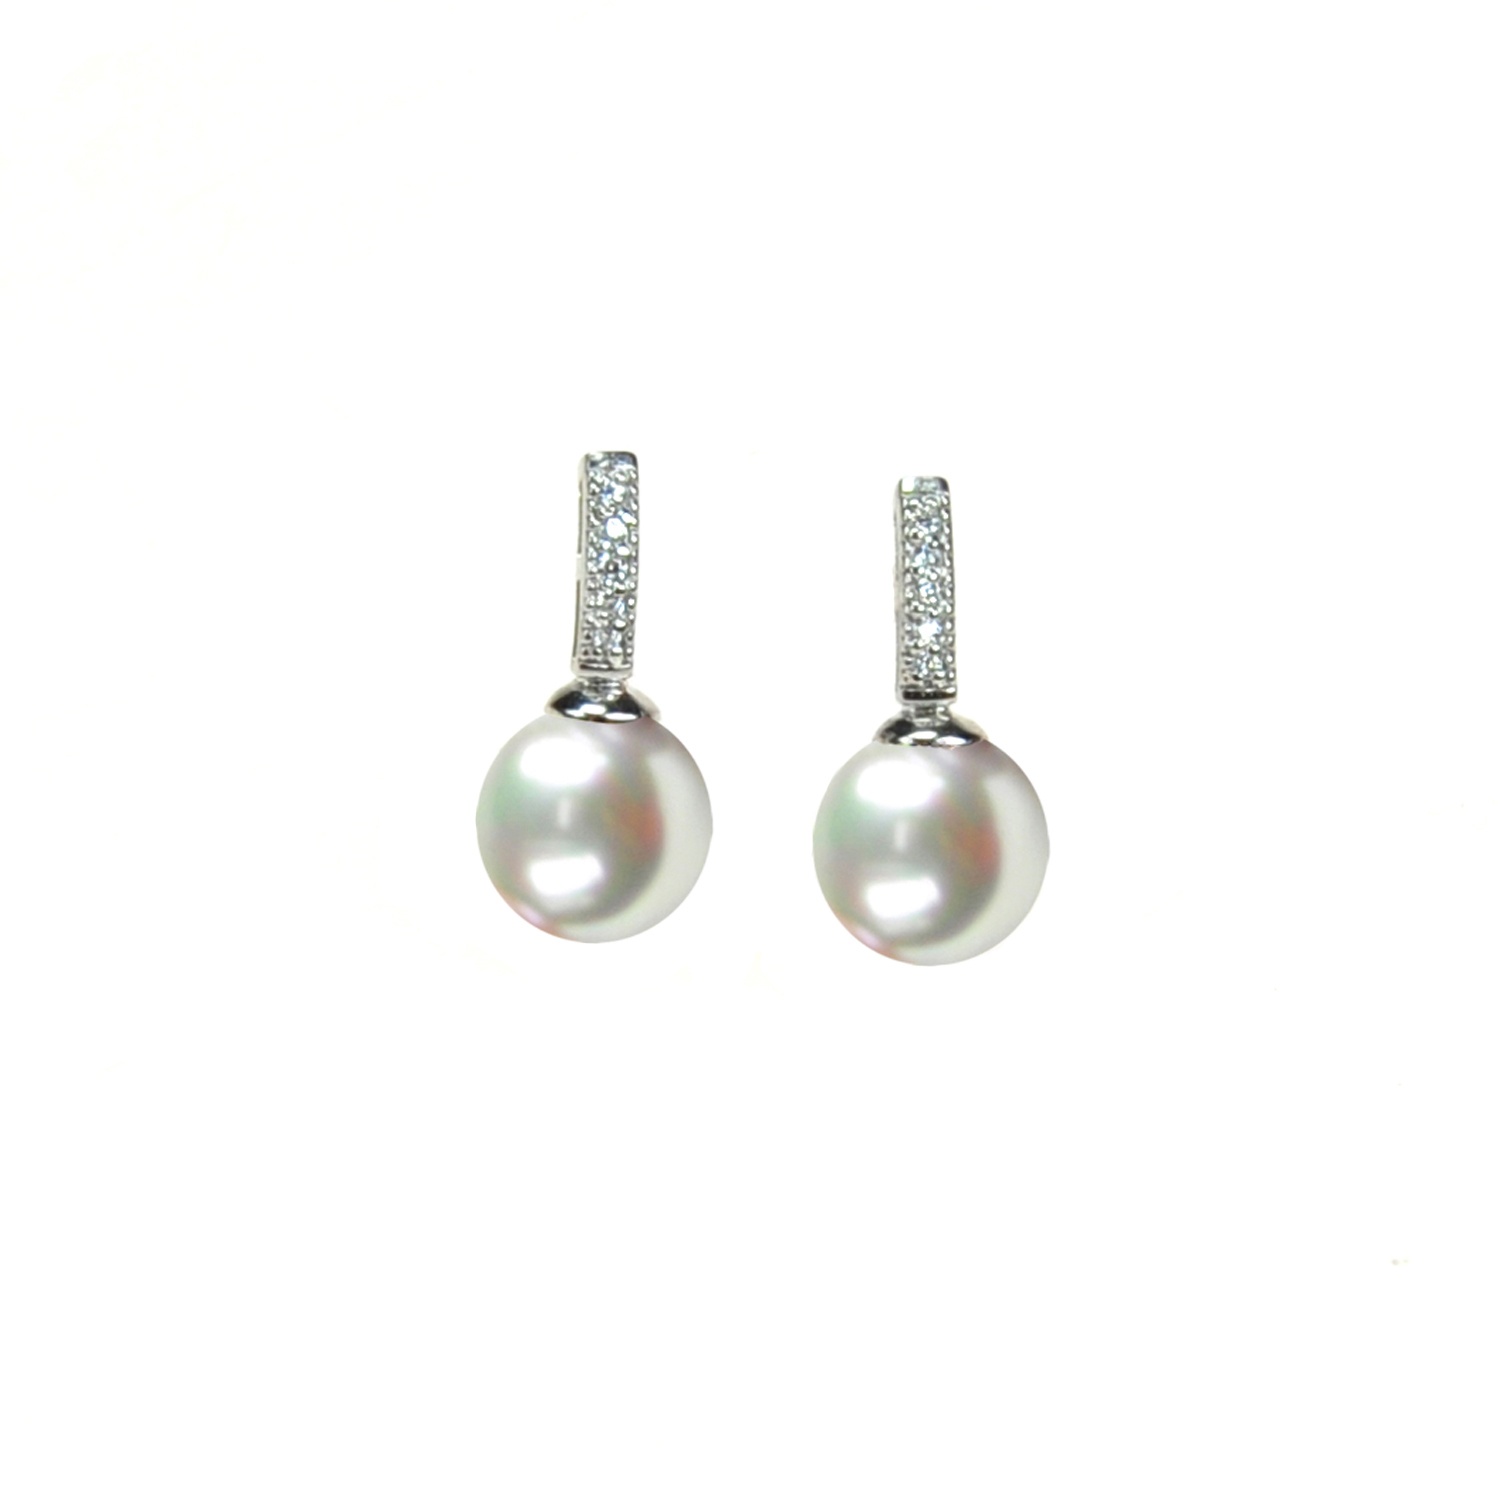 Silver Earrings with 9 mm. White Pearls and Zircons